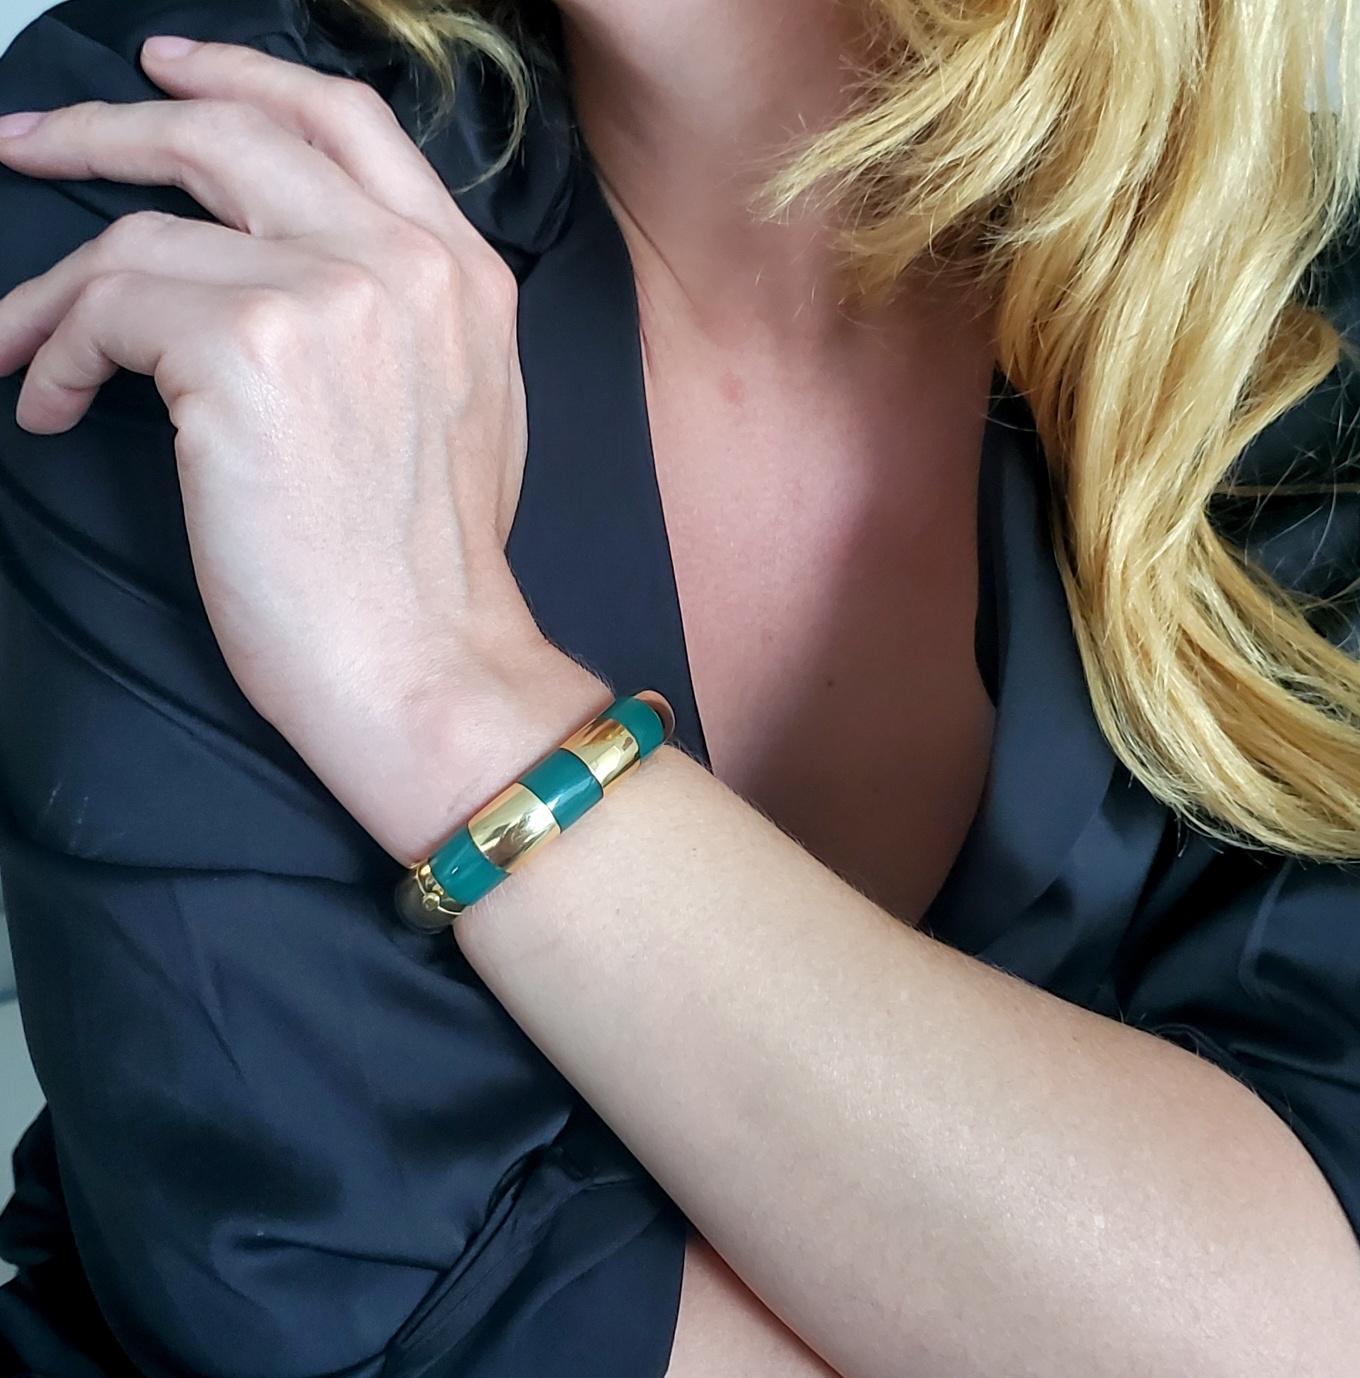 Cuff bracelet designed by Sonia Younis for Tiffany & Co.

Very rare modernist piece, created by Sonia Younis for The Tiffany Studios, back in the 1973. This beautiful piece has been crafted with geometric patterns in solid yellow gold of 18 karats,